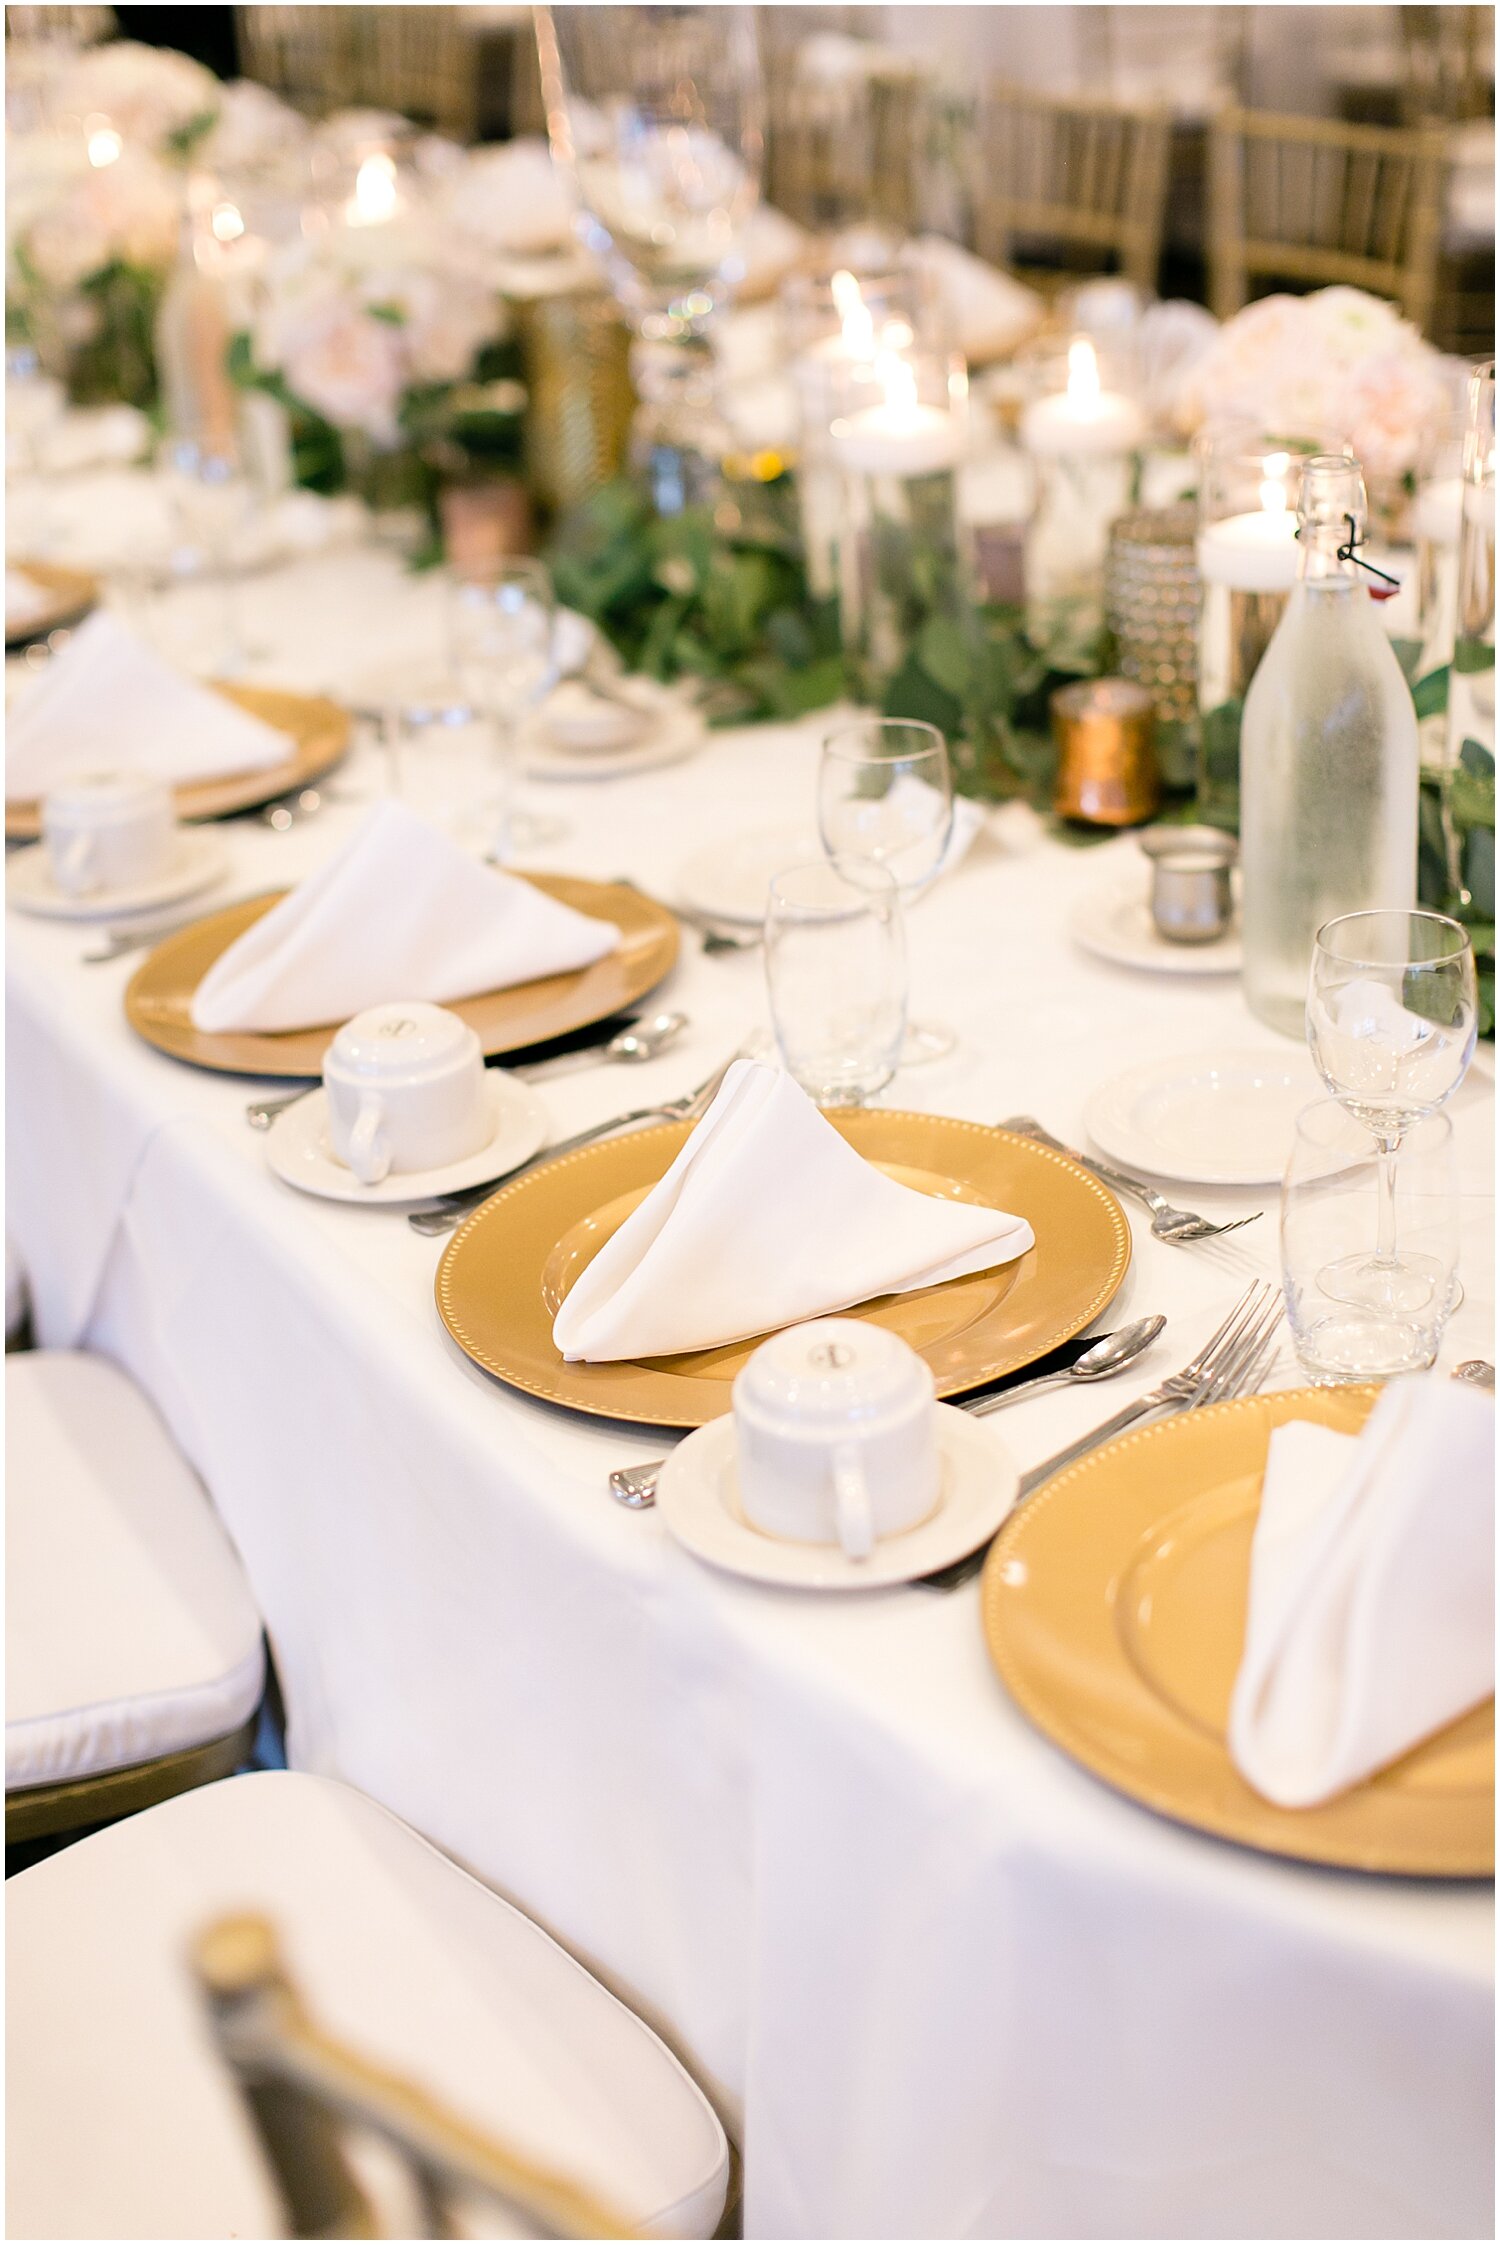  gold chargers and garland wedding centerpiece   